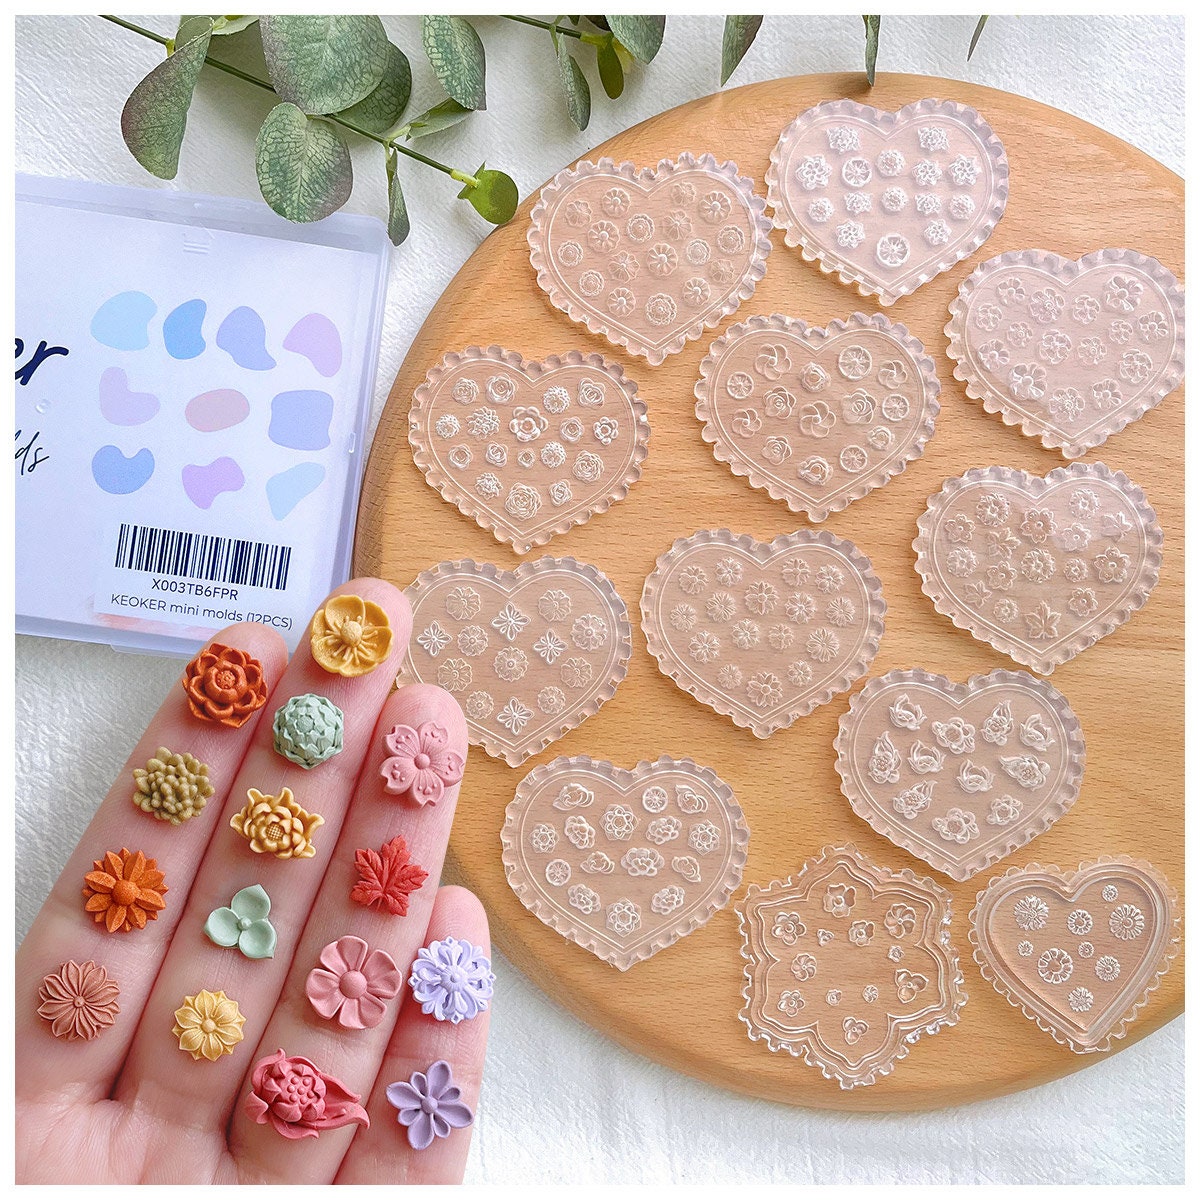 Keoker Polymer Clay Texture Sheets, Clay Texture Mat for Making Earrings  Jewerly, Polymer Clay Earrings Tools (All-3 pcs)